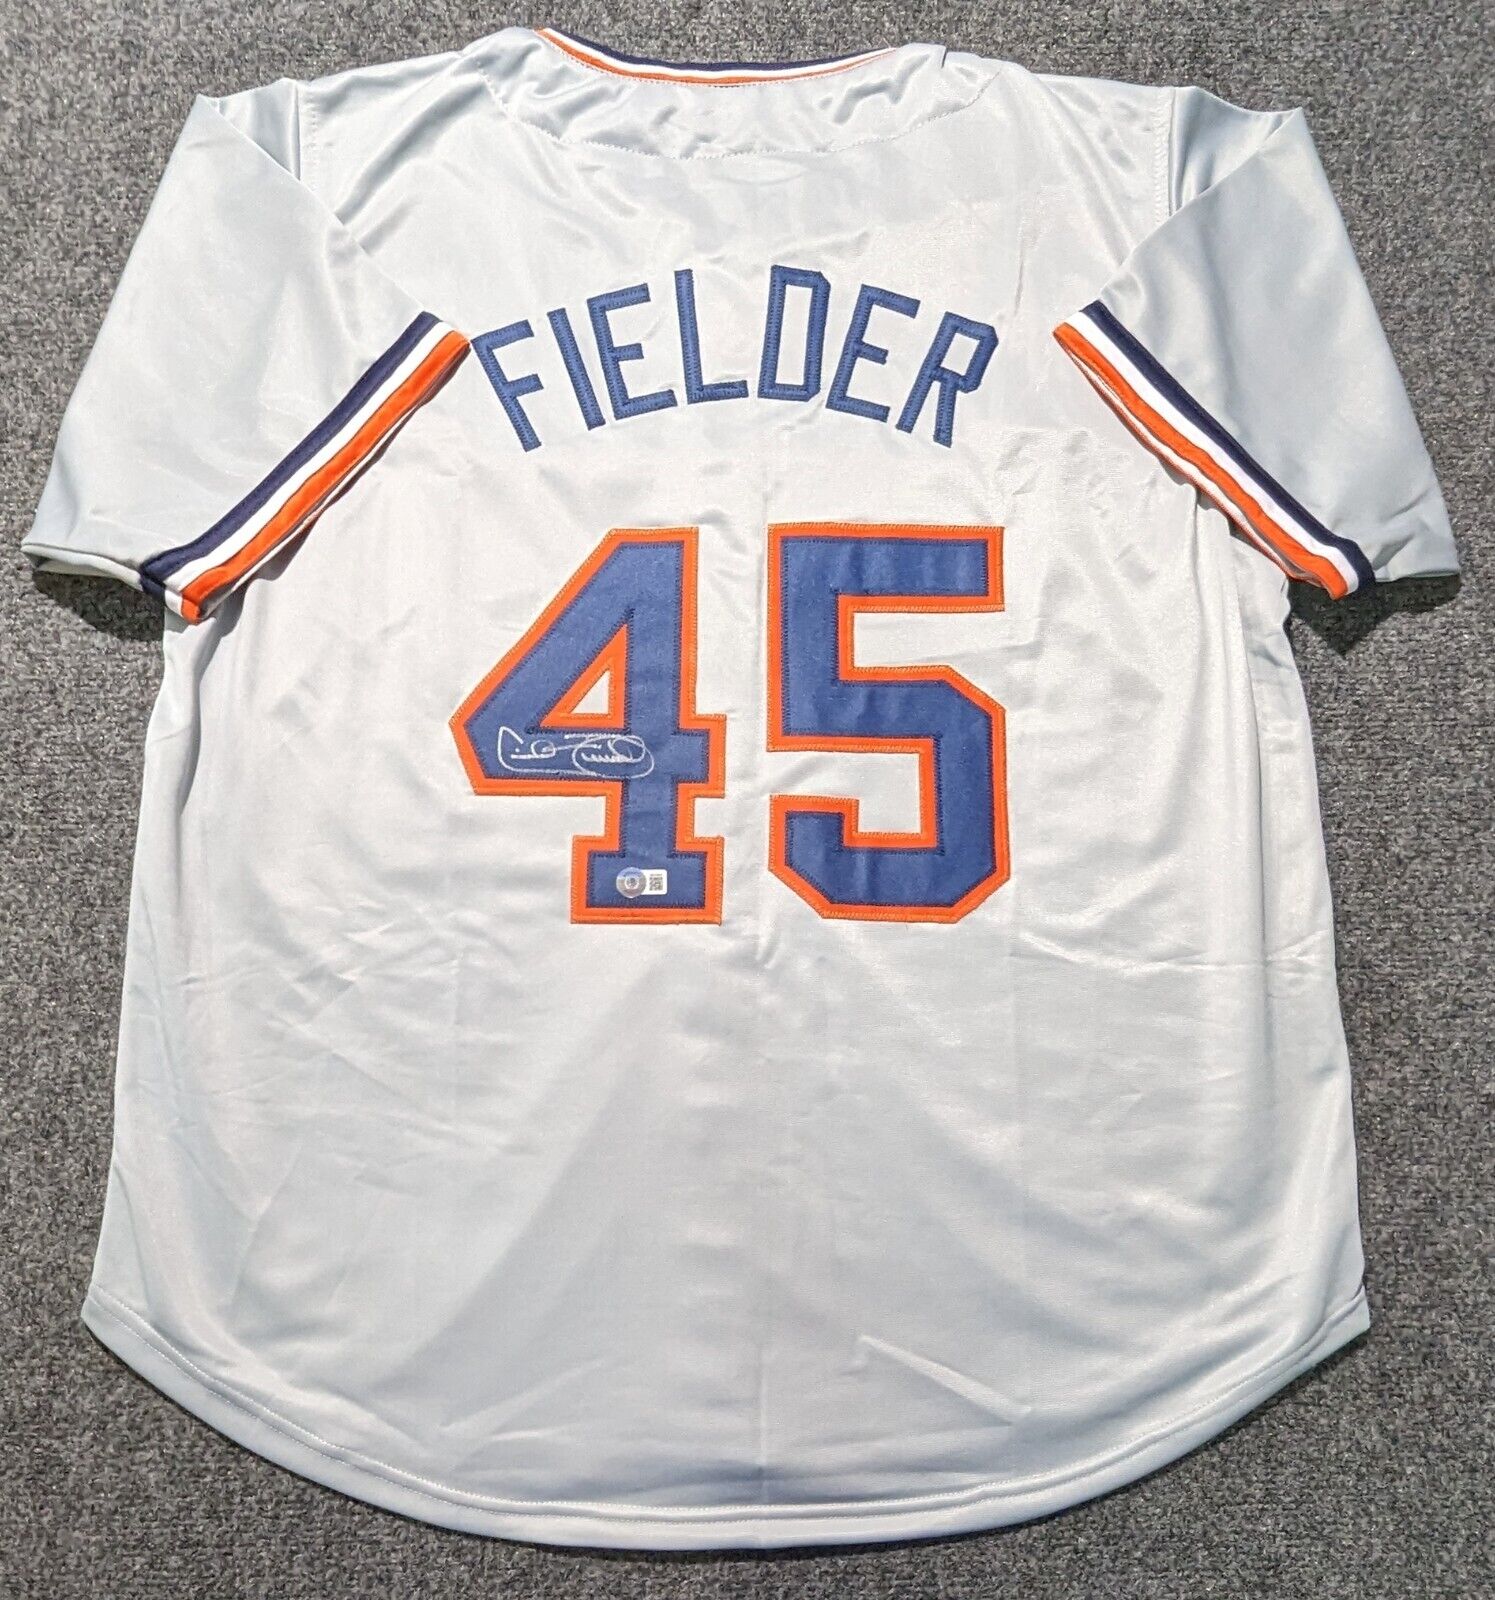 Detroit Tigers Cecil Fielder Autographed Signed Jersey Beckett Holo